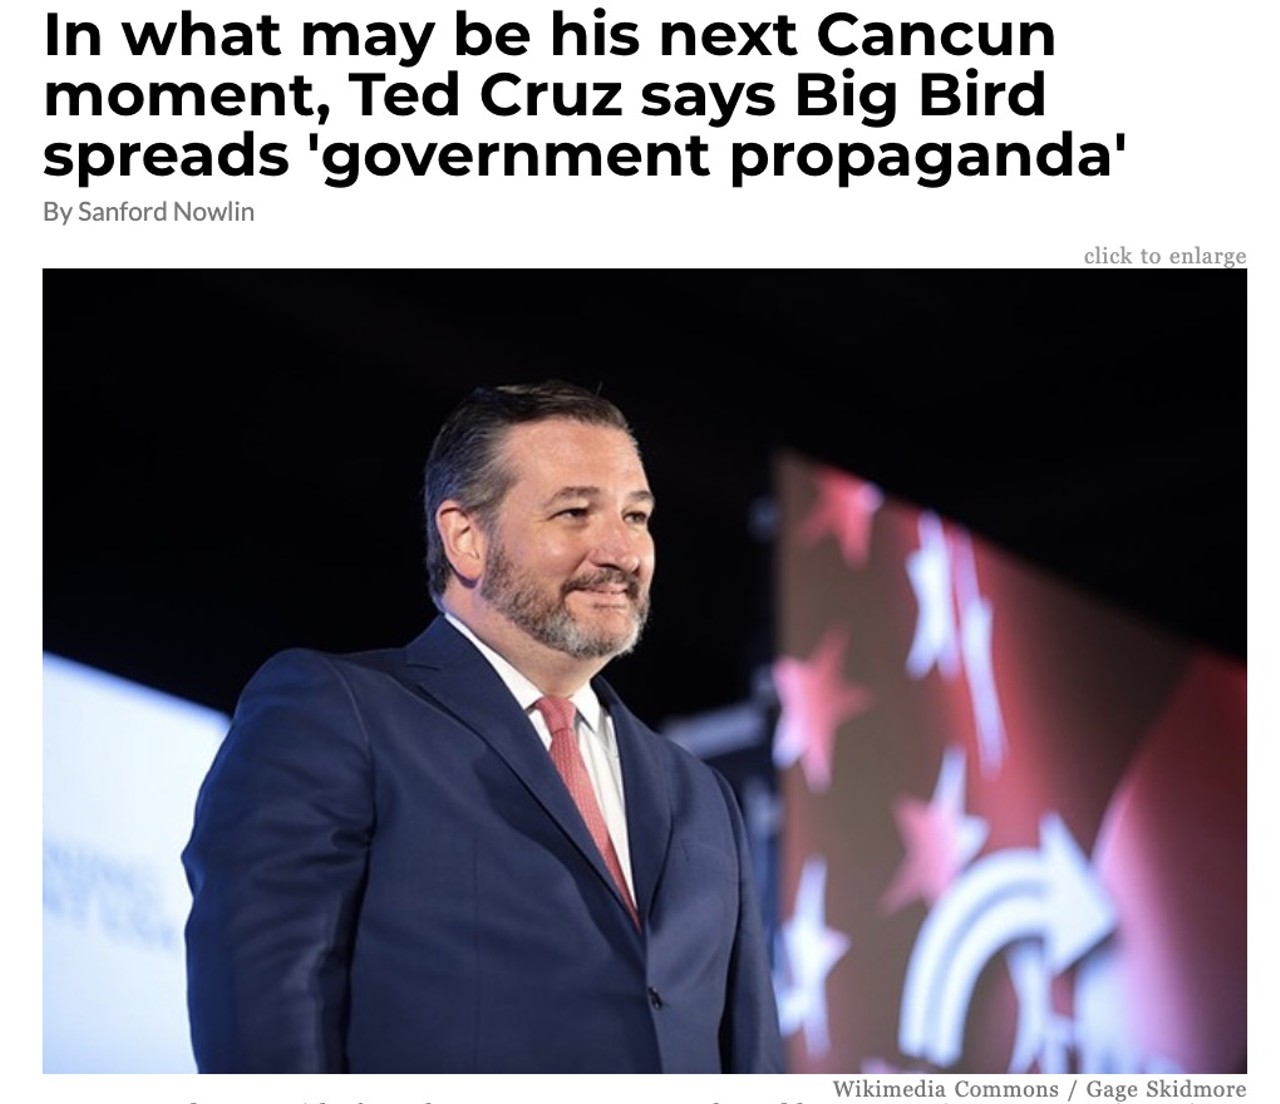 In what may be his next Cancun moment, Ted Cruz says Big Bird spreads 'government propaganda' 